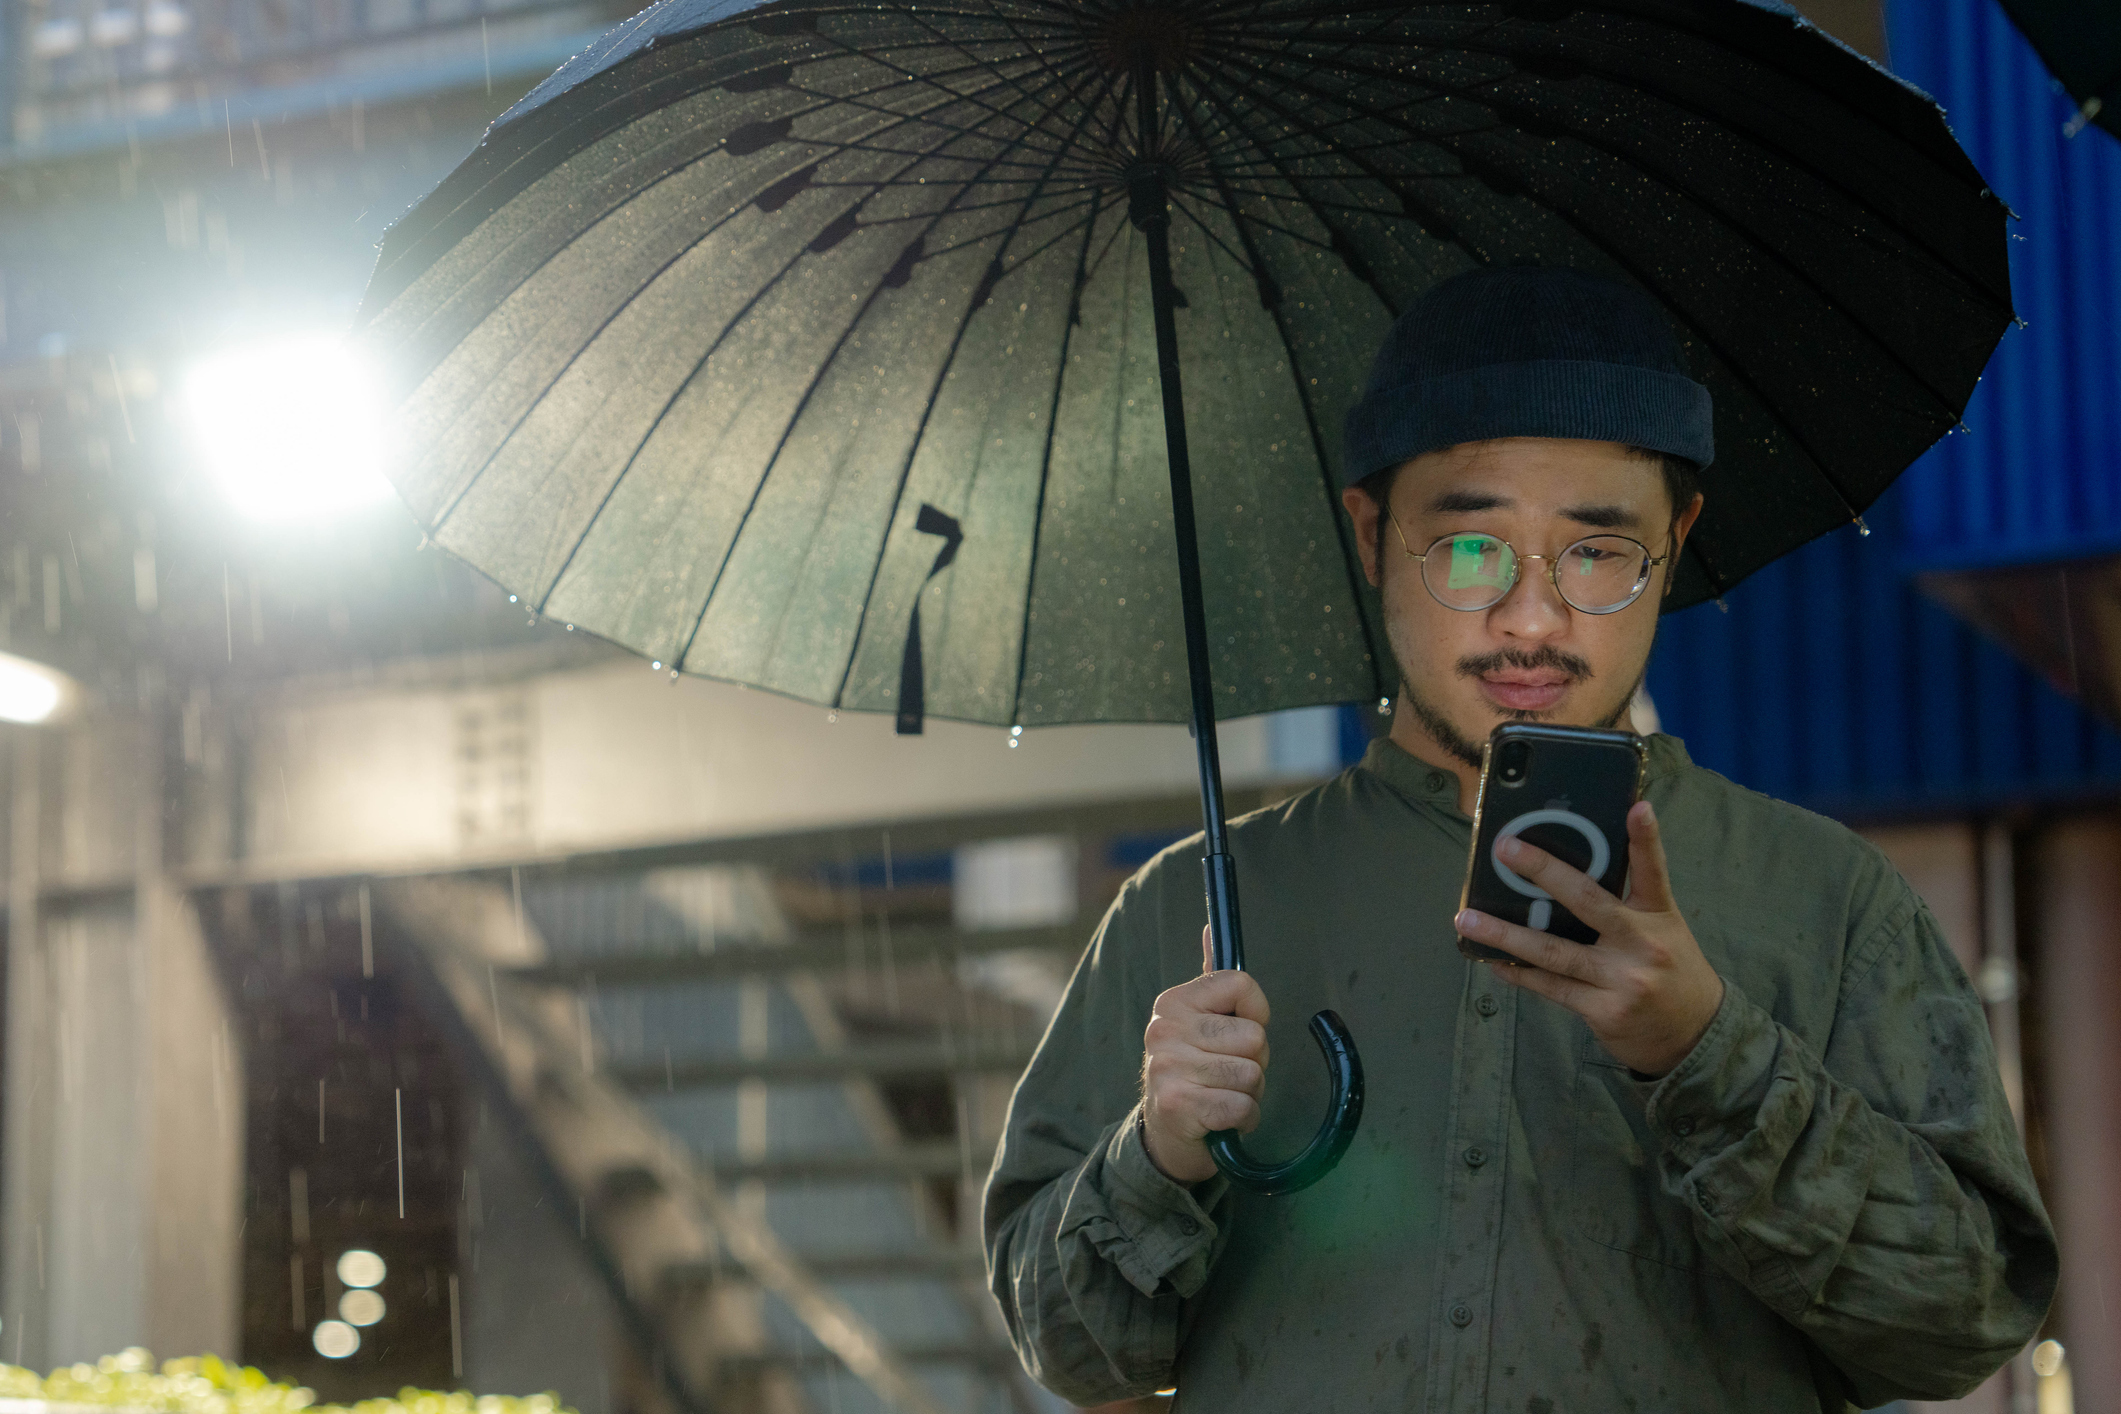 A man wearing a beanie and glasses looks at his smartphone under an umbrella with an annoyed expression. A floodlight appears over his shoulder.